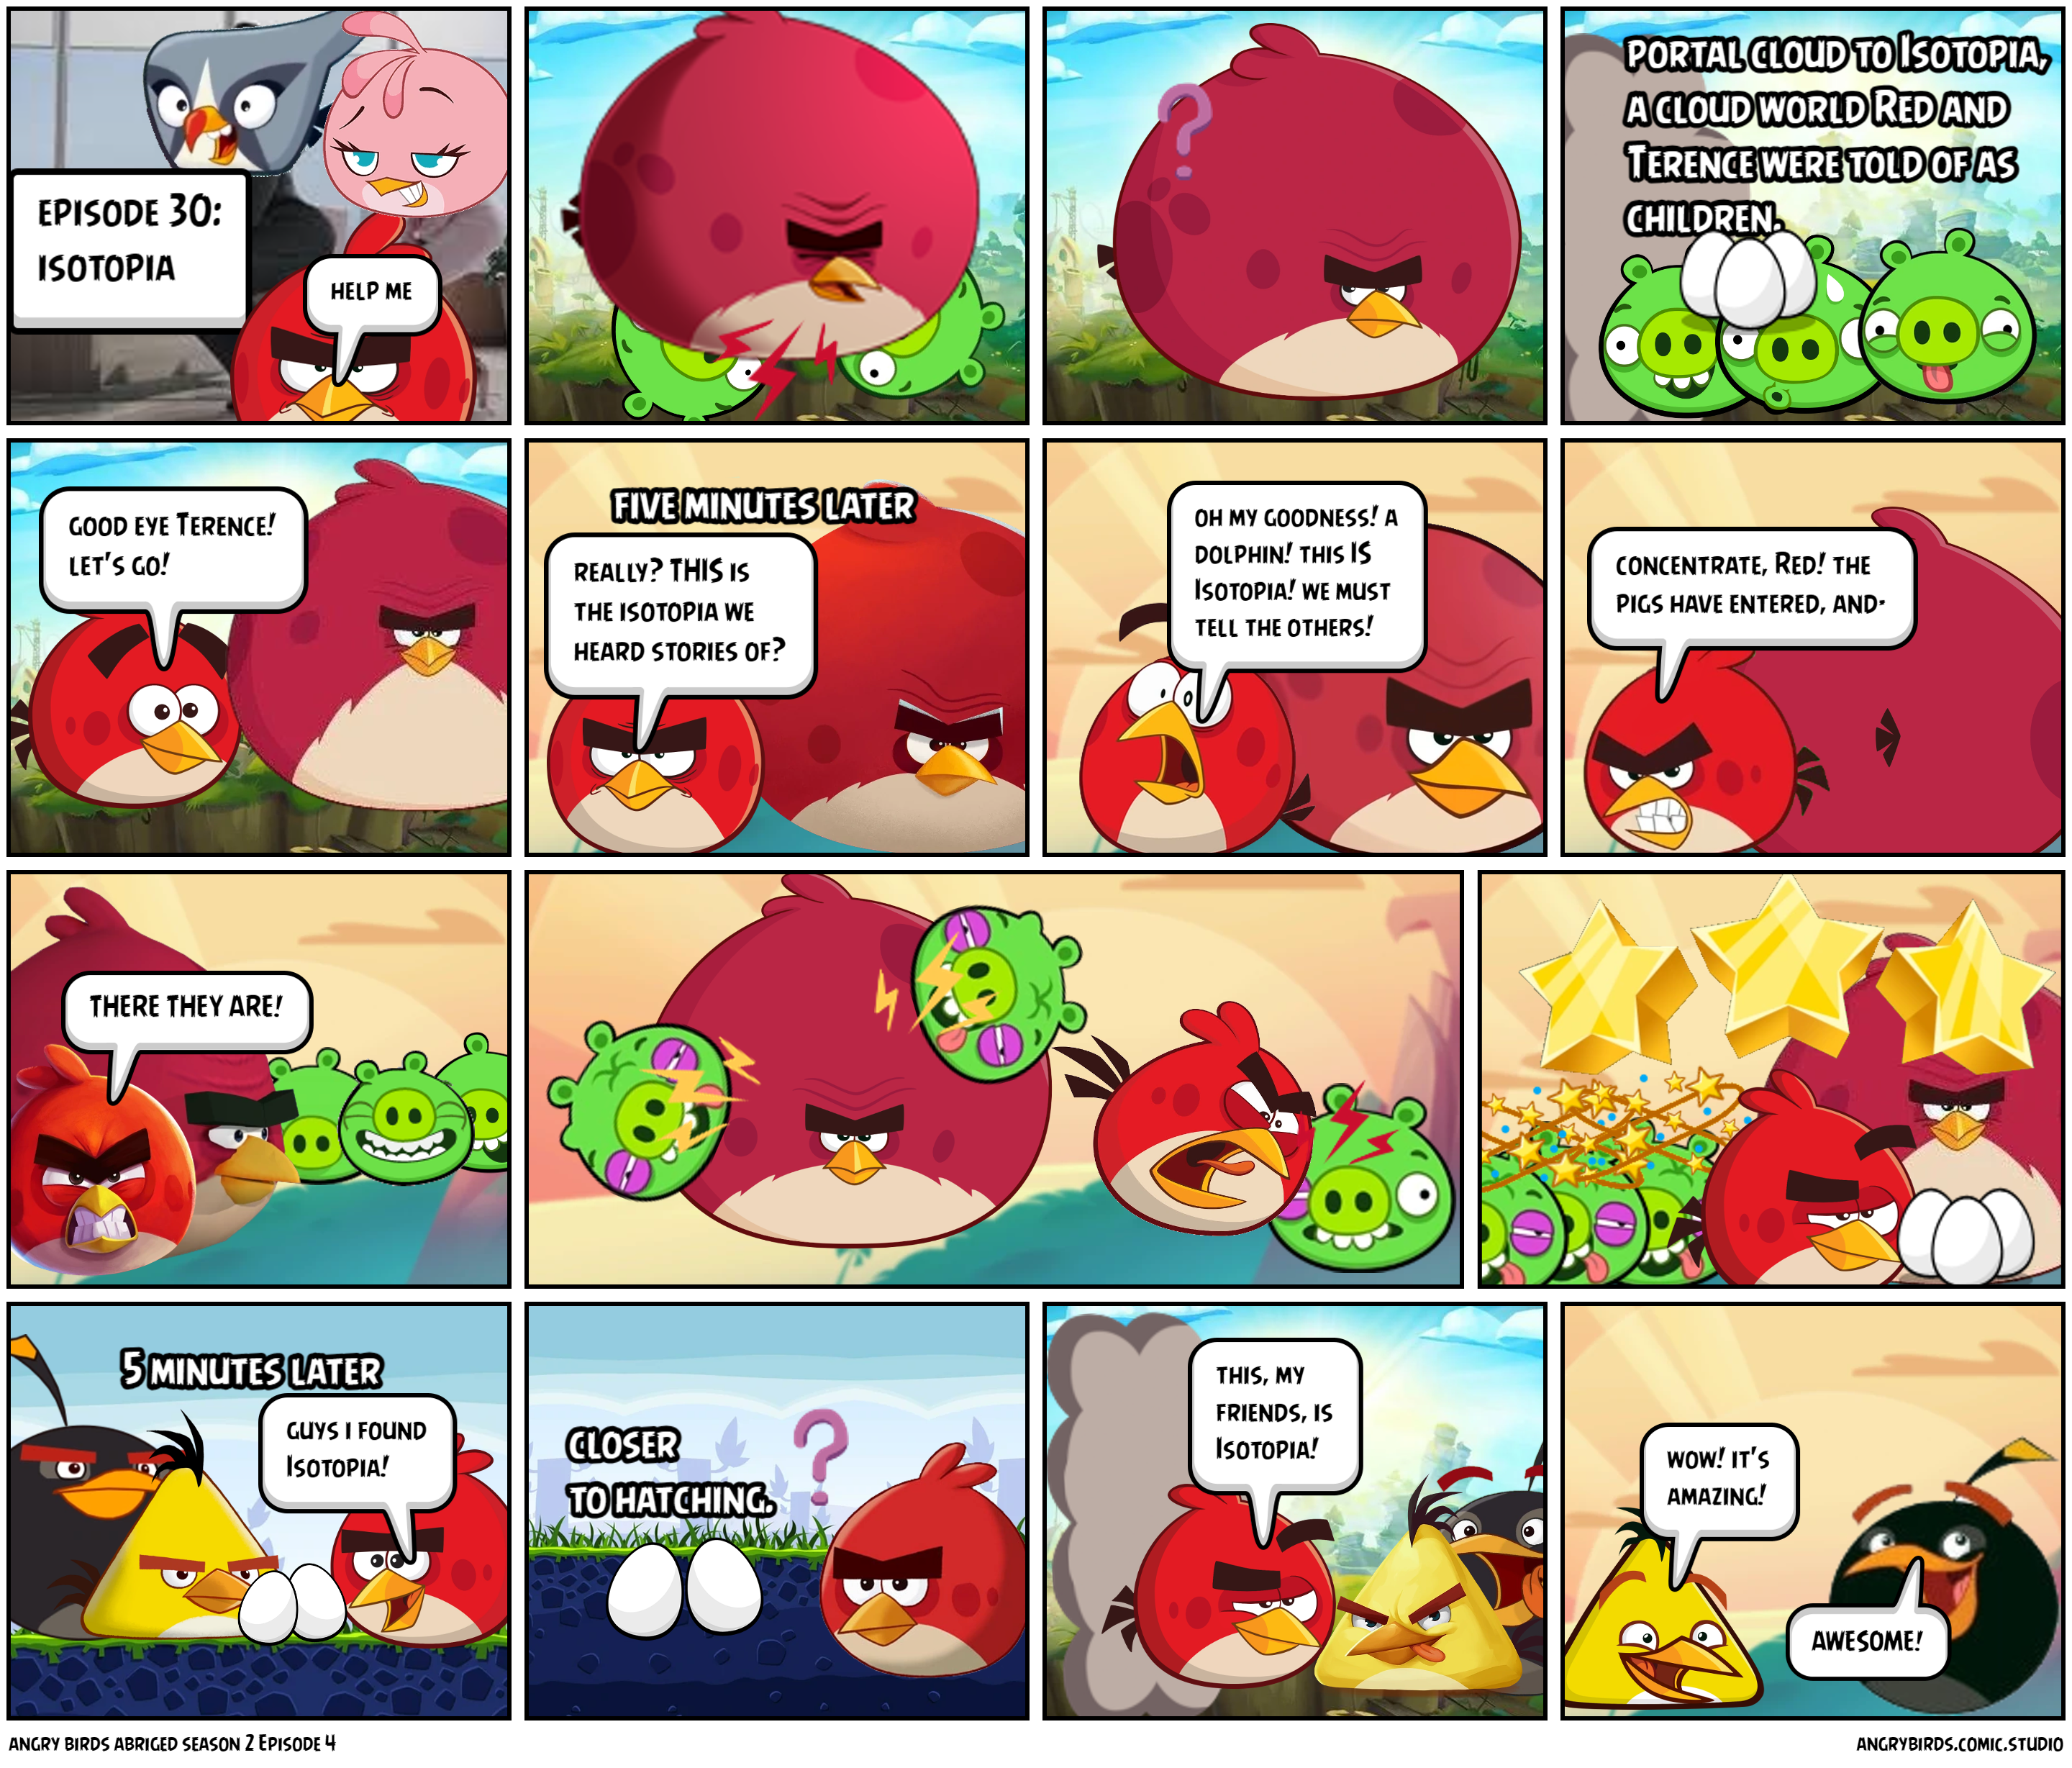 angry birds abriged season 2 Episode 4